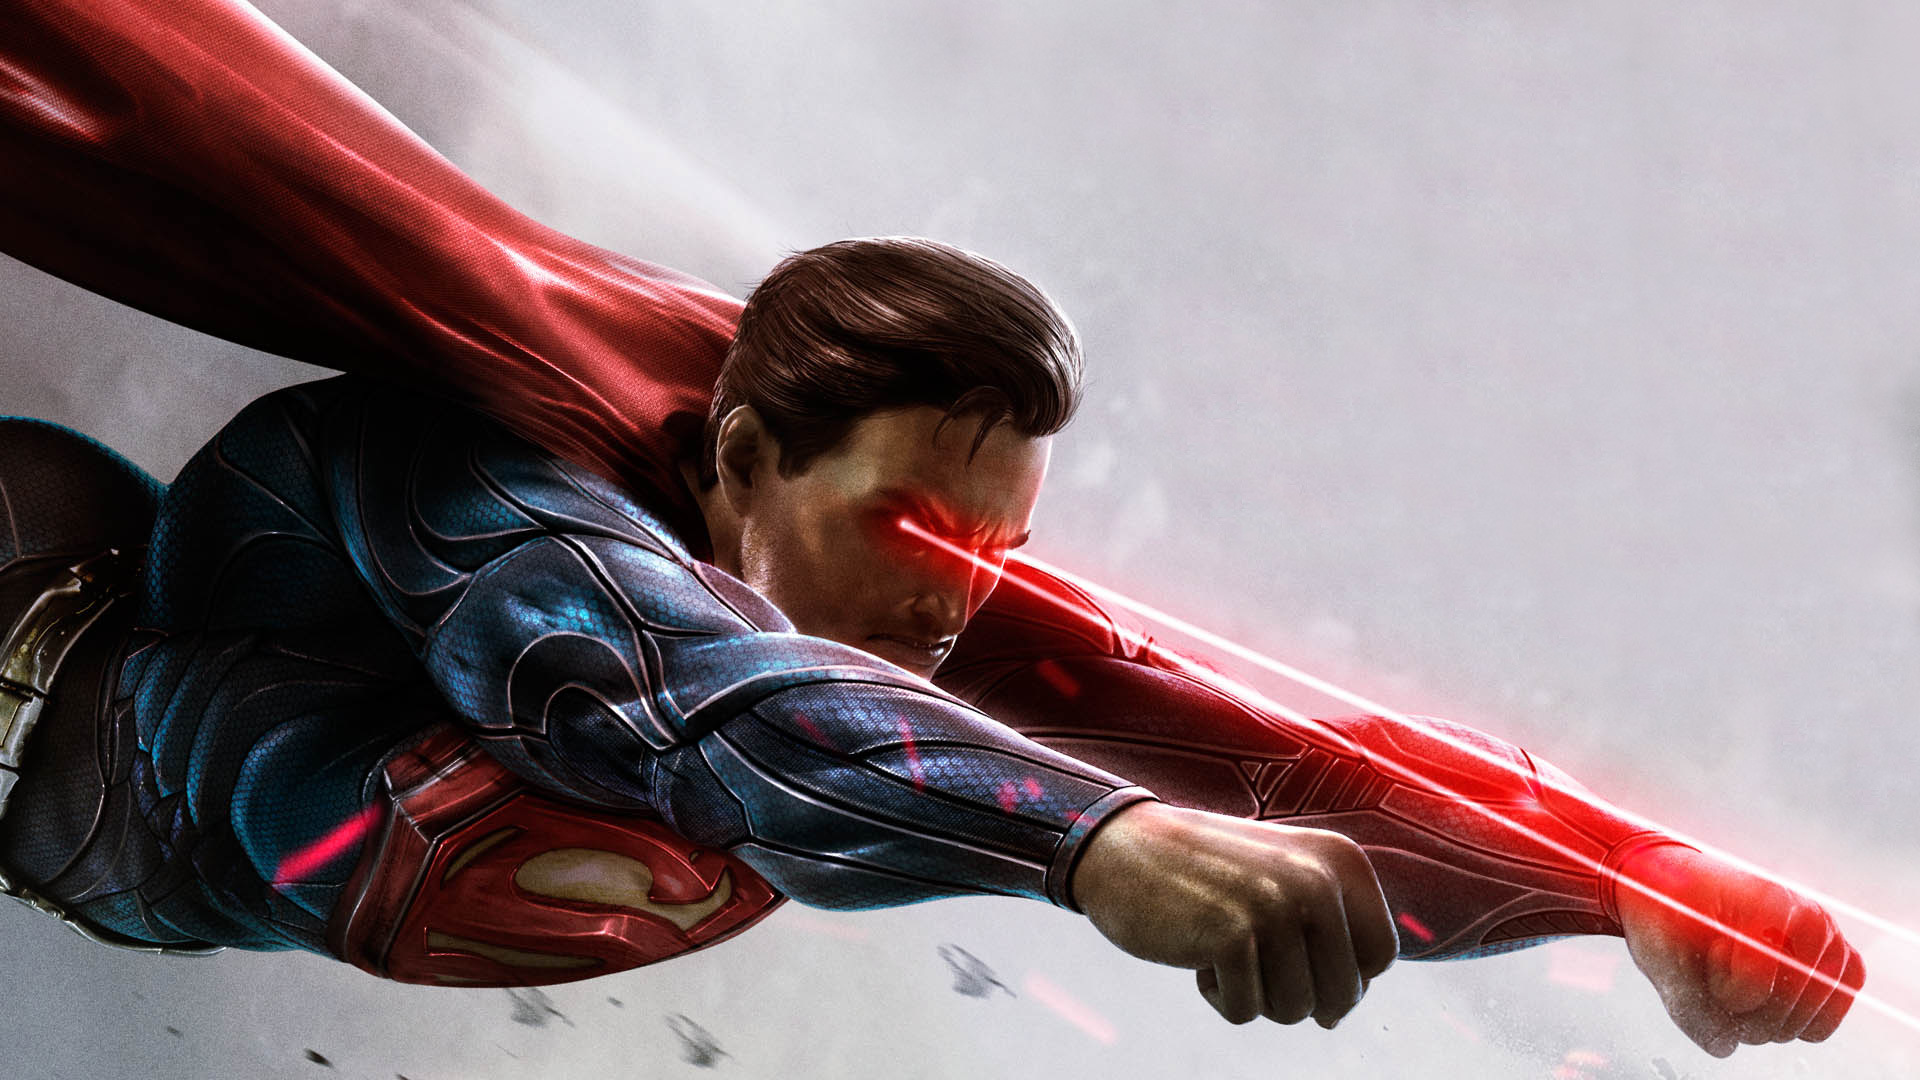 High Resolution Superman Background Wallpaper HD Full Size ...